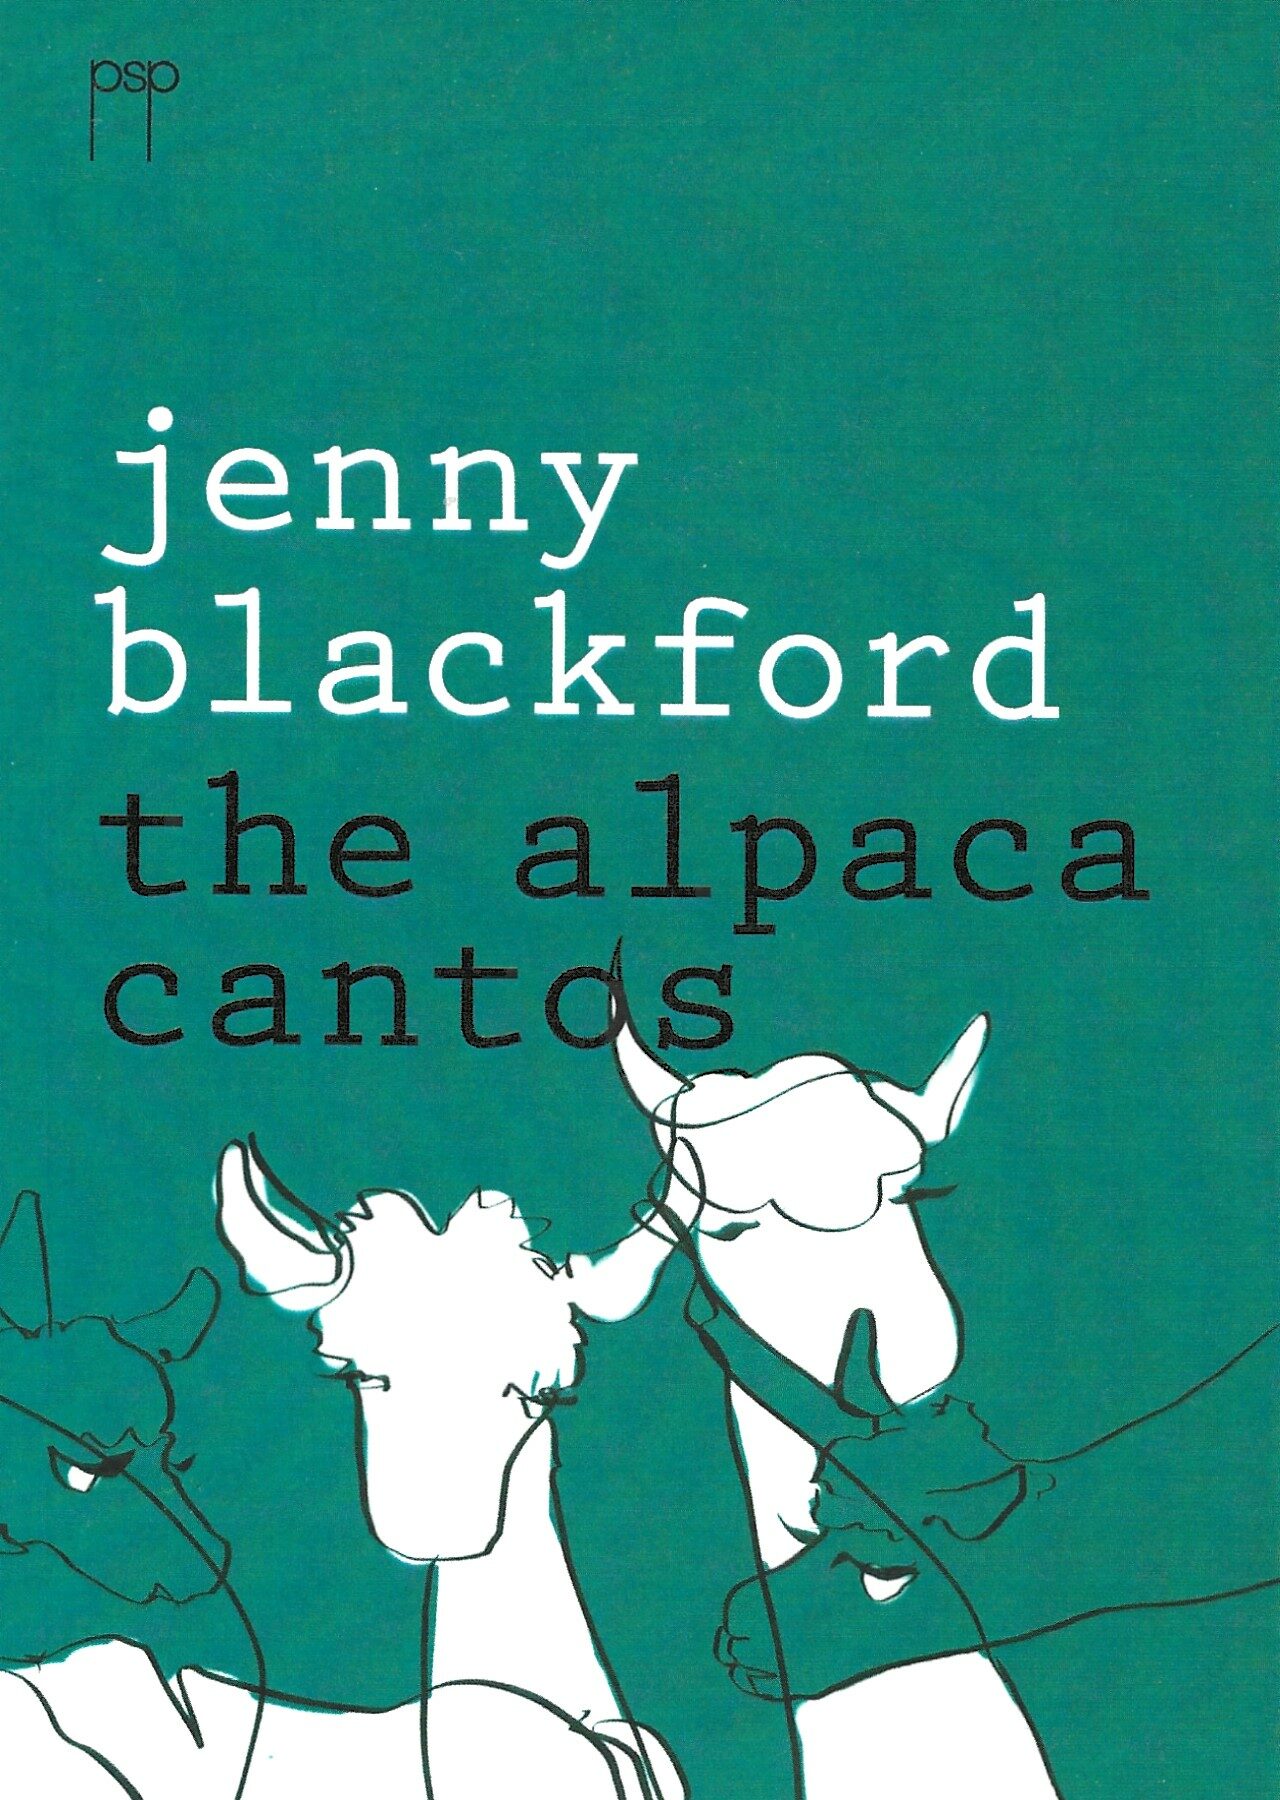 A green-blue book cover with black and white line illustrations of alpacas. The poet and title are in all lowercase typewriter-style font above